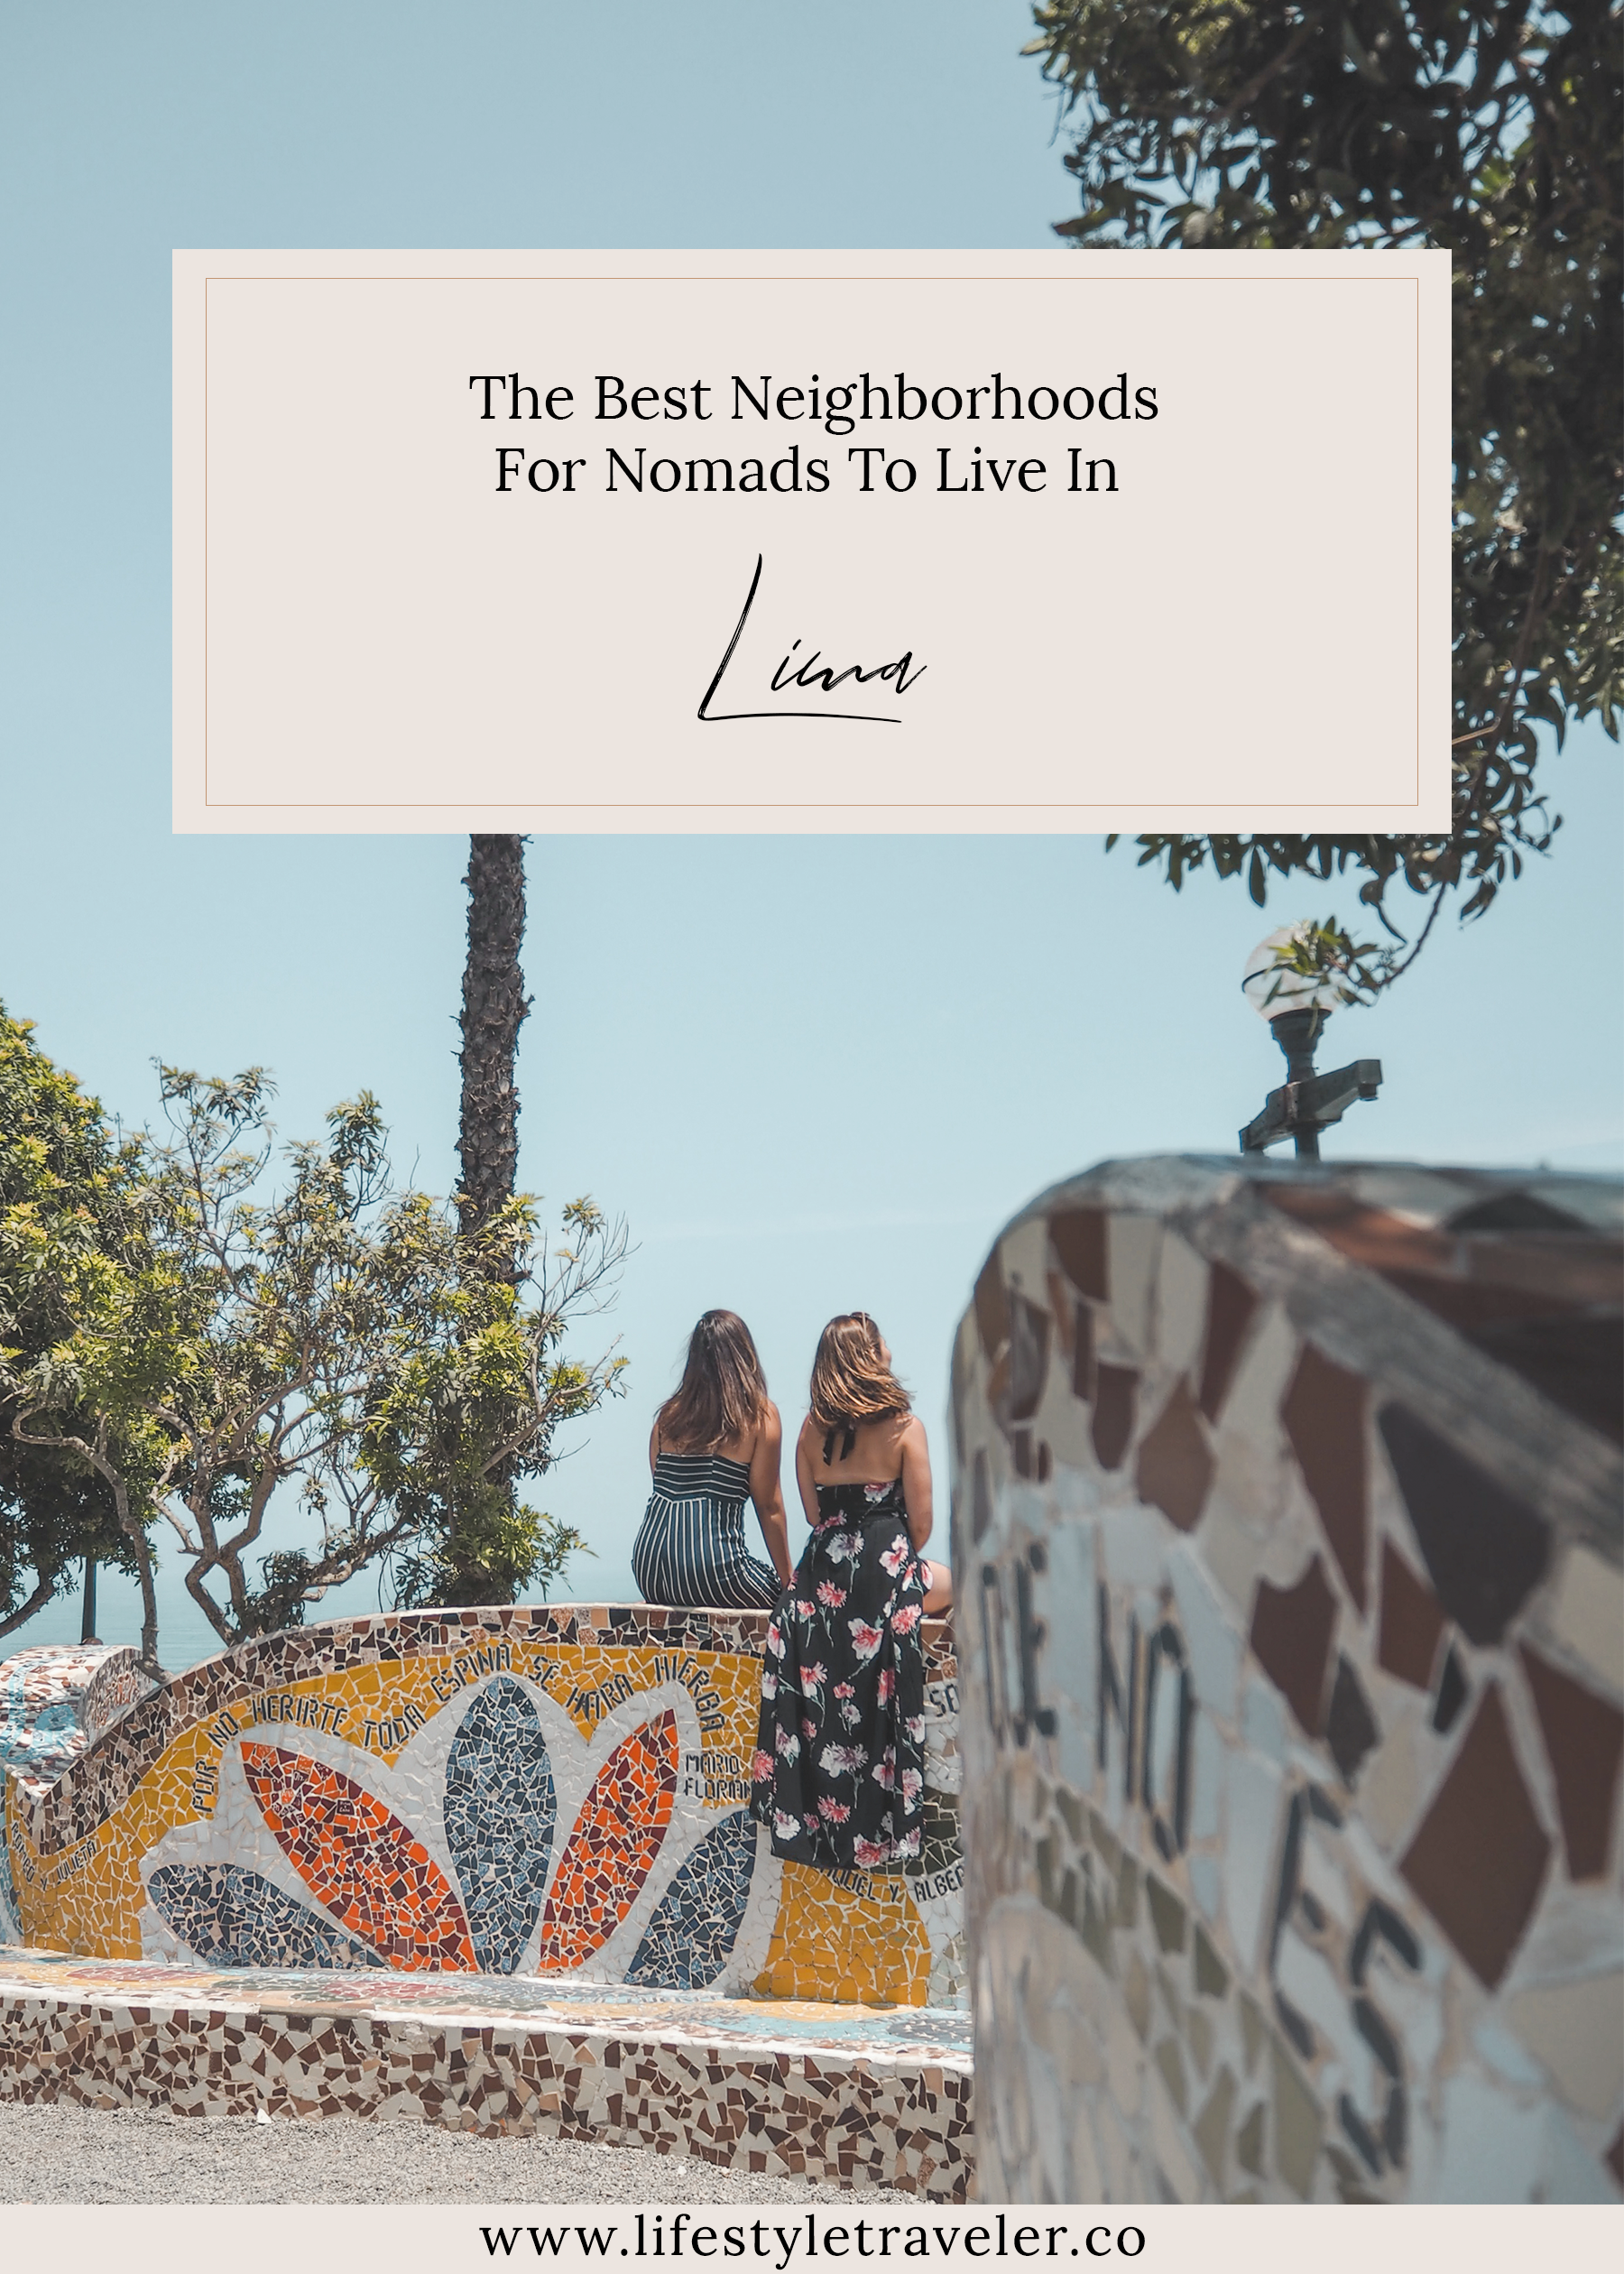 The Best Neighborhoods To Live In Lima For Nomads | lifestyletraveler.co | IG: @lifestyletraveler.co